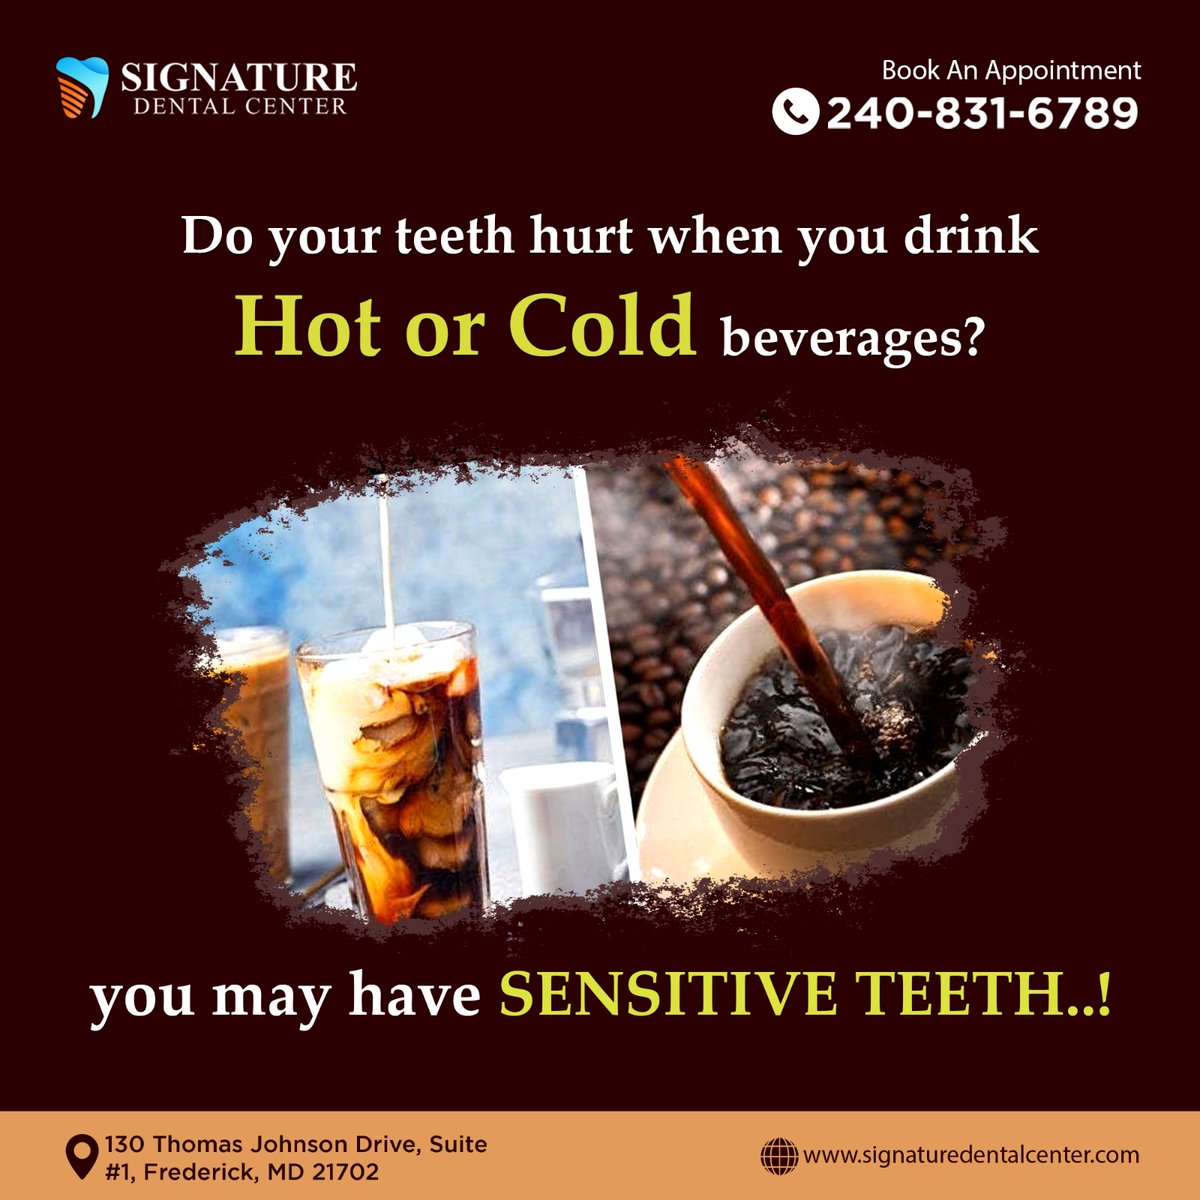 Do you experience tooth pain when drinking hot or cold beverages? It might be a sign of sensitive teeth. Let us help you find relief!
.
For appointments, call or text: +1240-831-6789
Or Visit: signaturedentalcenter.com
.
#Dentalcheckups #Pediatricdentistry #toothextraction